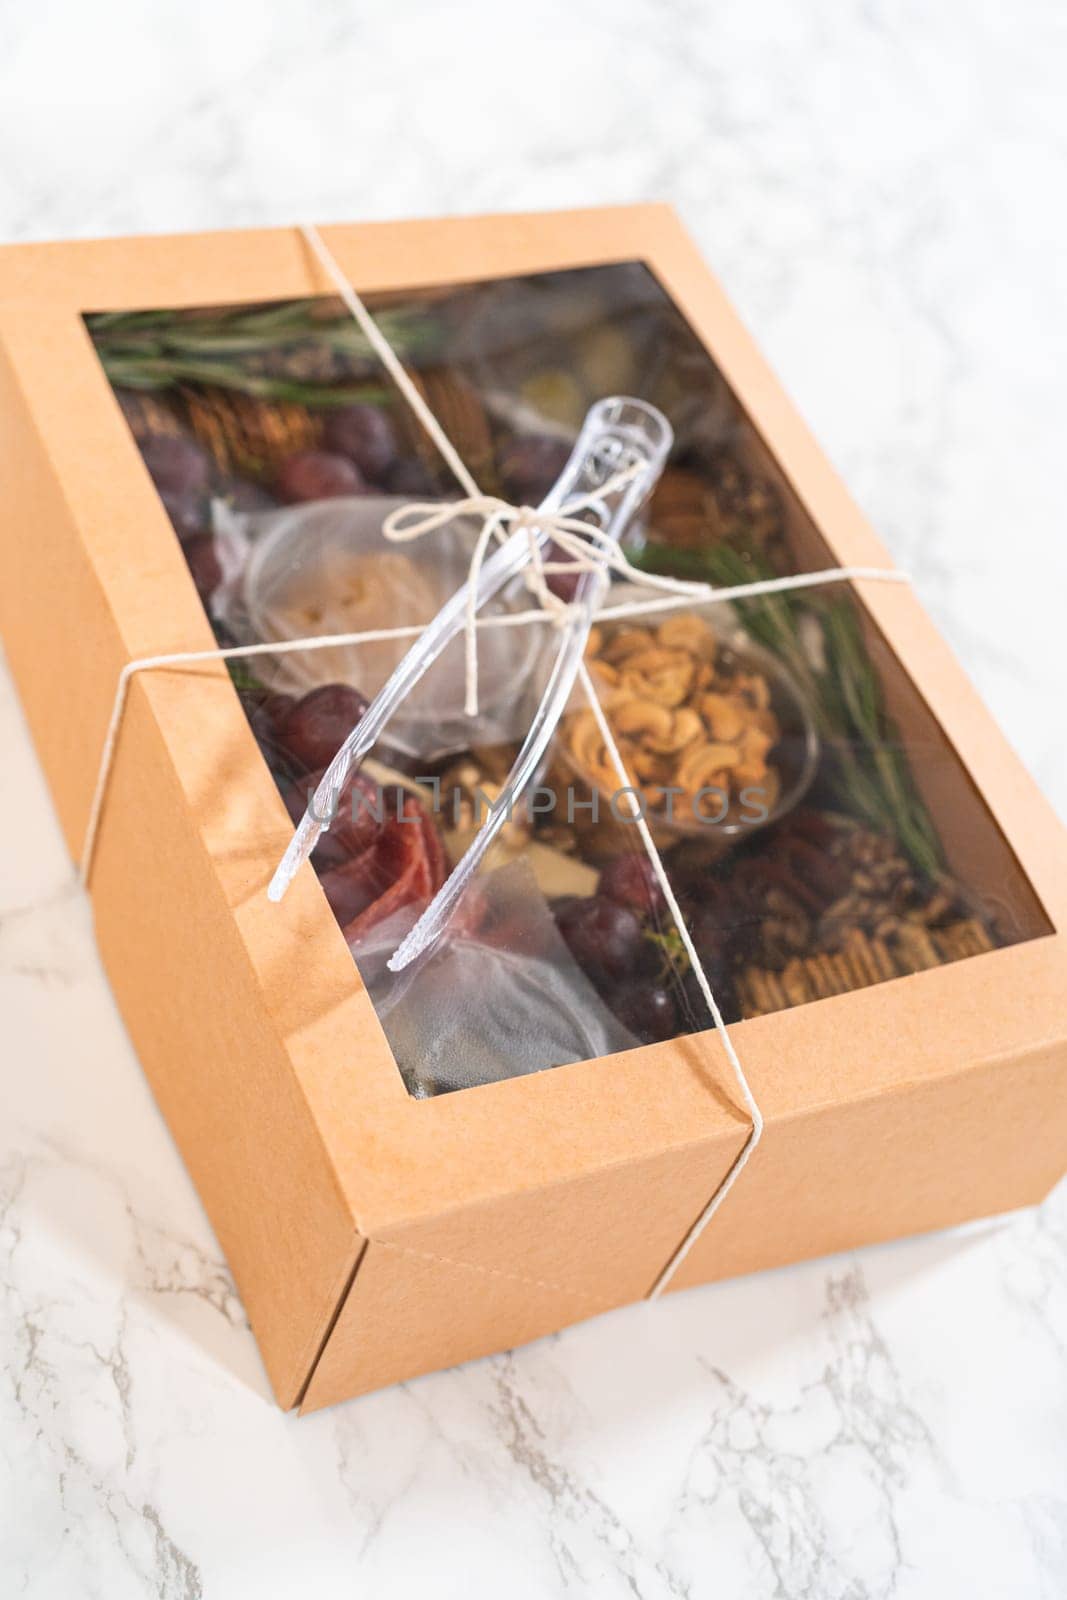 Charcuterie box featuring sliced meat, cheese, crackers, and grapes, all neatly packaged in a brown gifting box.